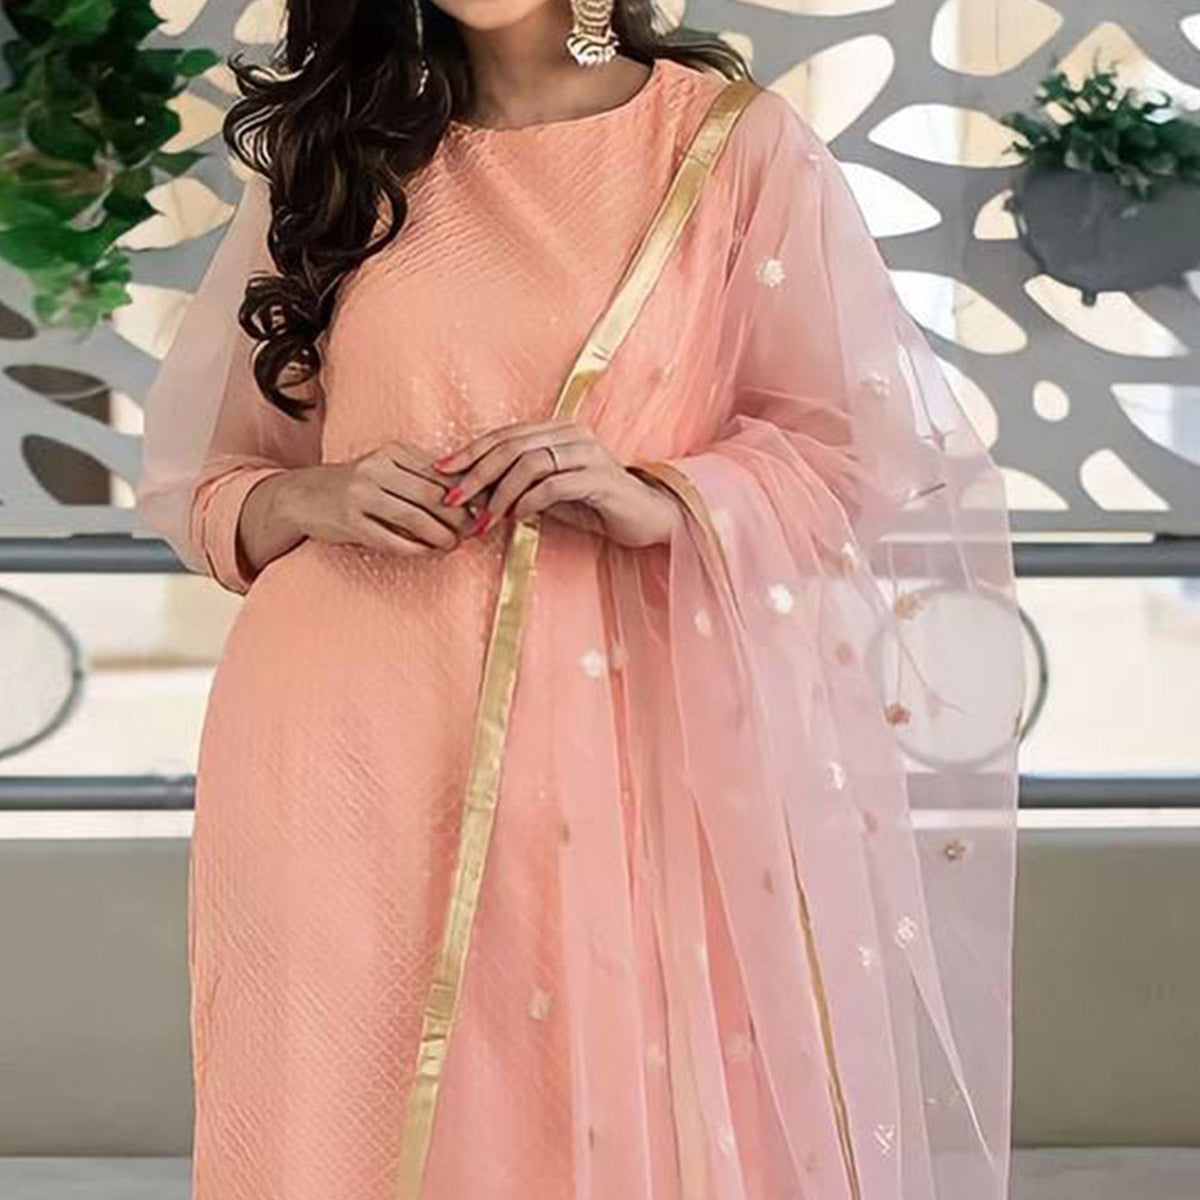 Peach Embroidered Rayon Silk Suit